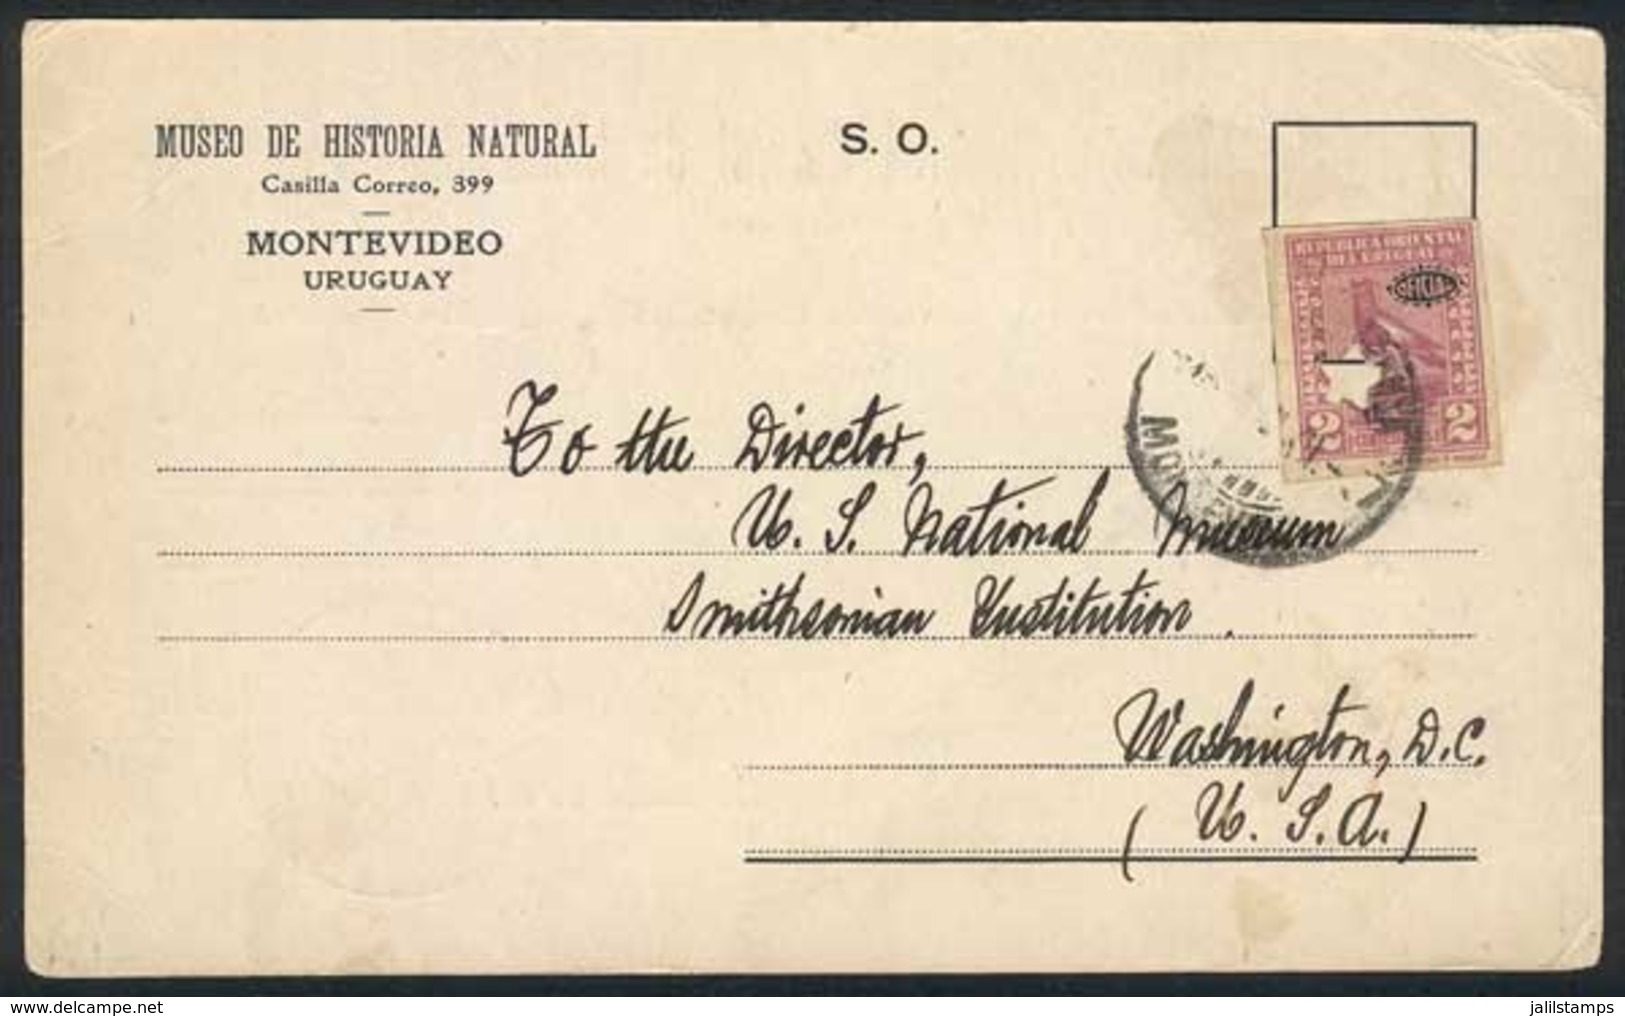 URUGUAY: Card Of The Museum Of Natural History Sent To USA On 26/DE/1927, Franked By Sc.O140 With Star-shapped Punch Hol - Uruguay